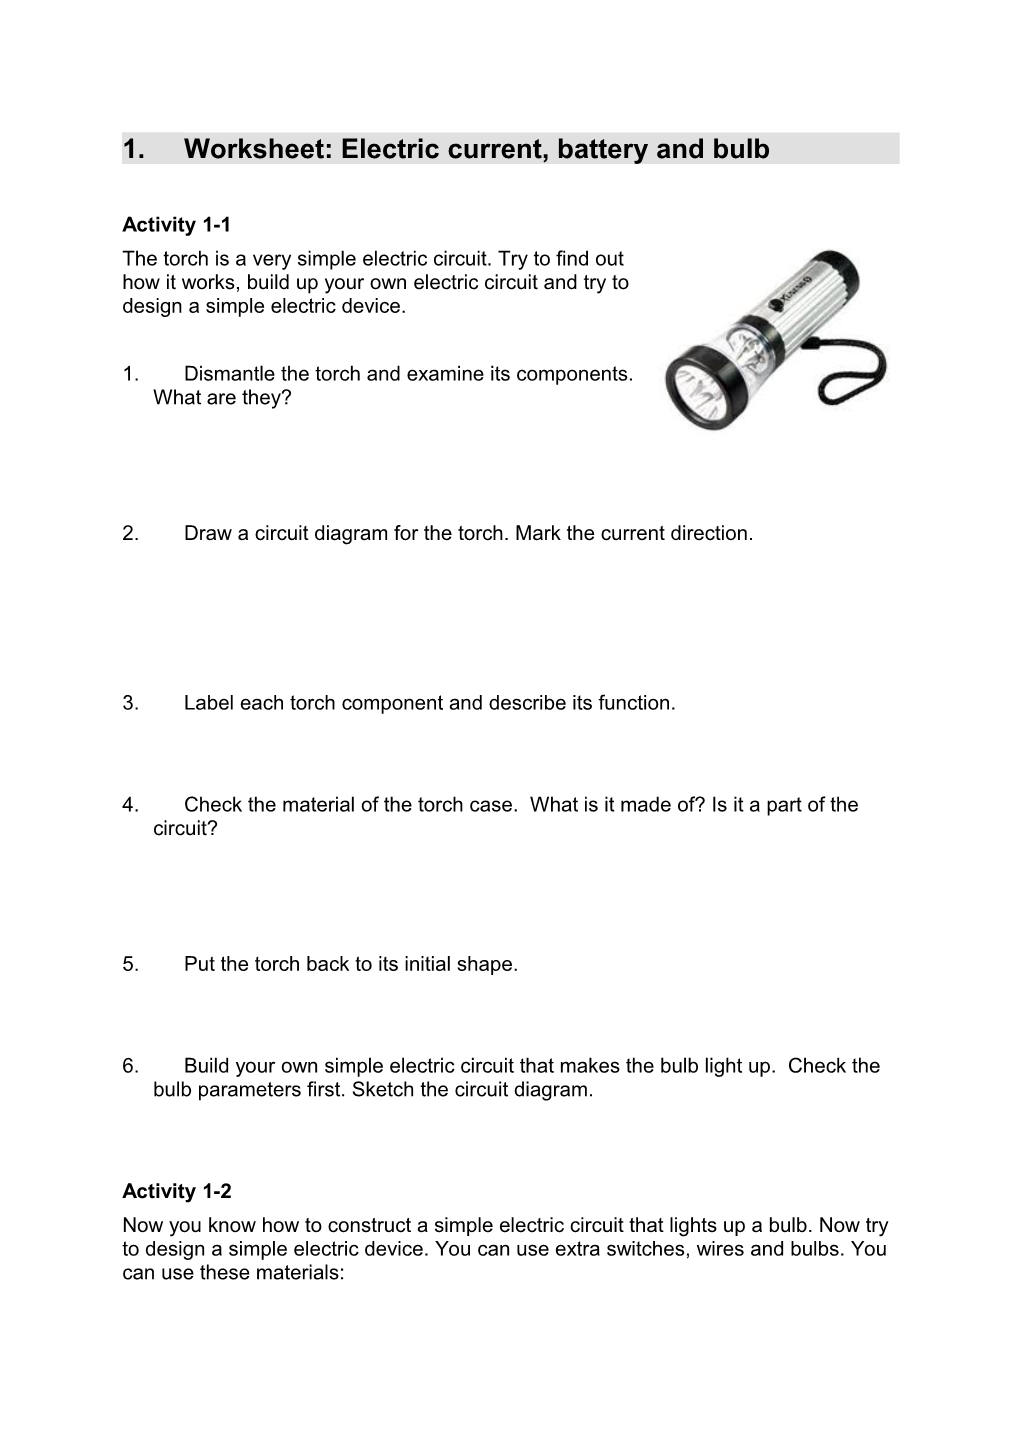 Worksheet: Electric Current, Battery and Bulb